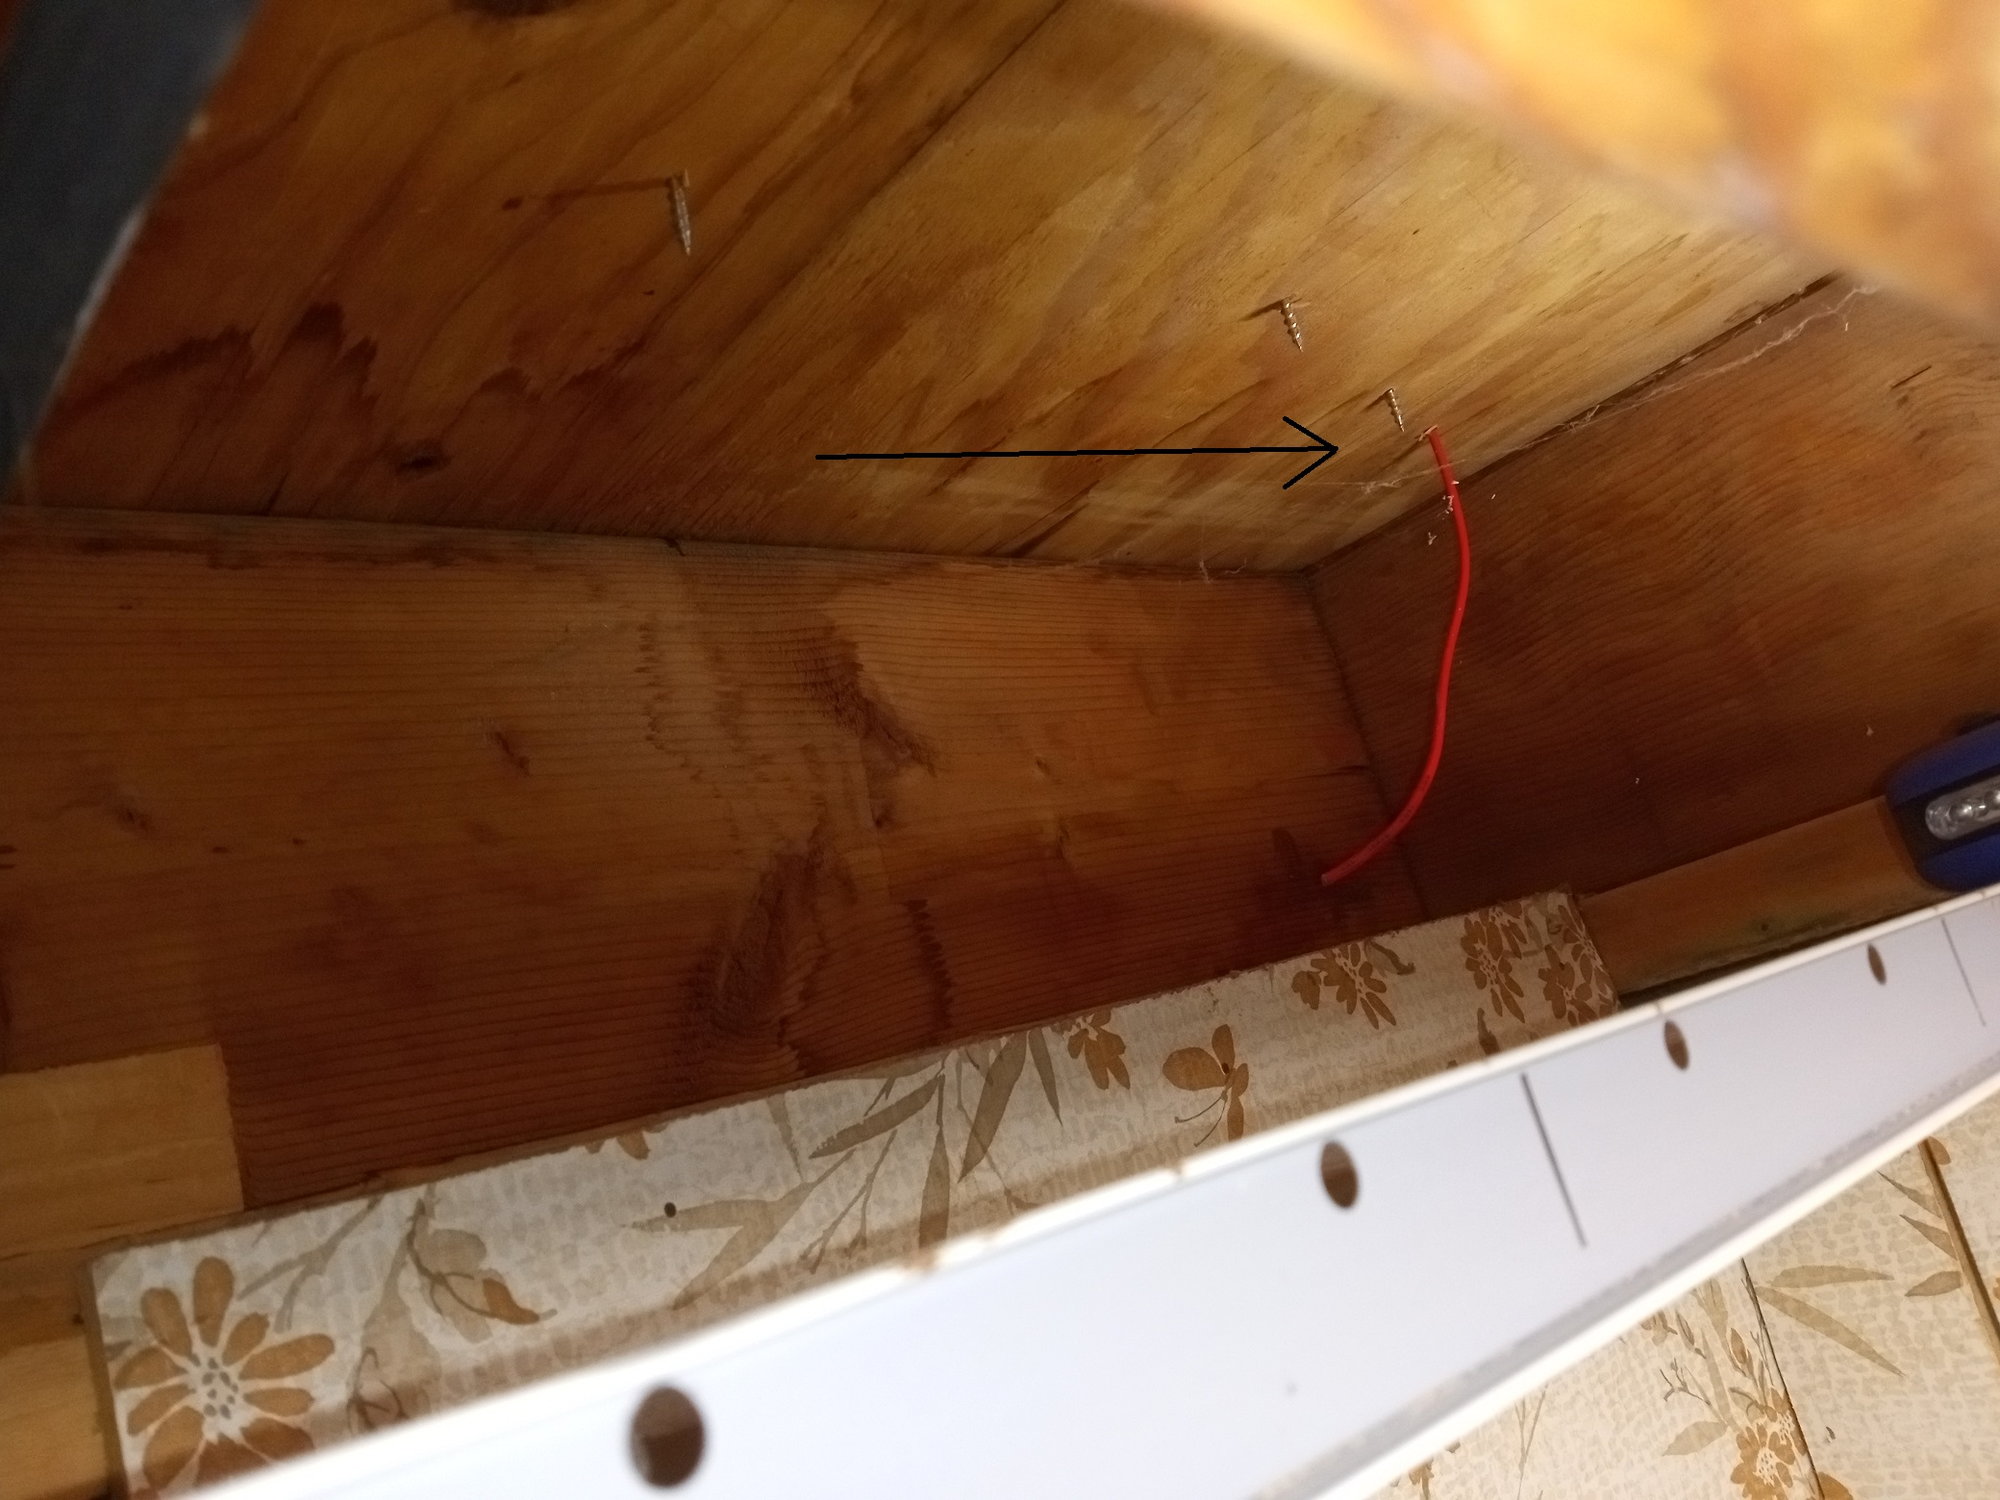 Refrigerator water line from basement to kitchen right above